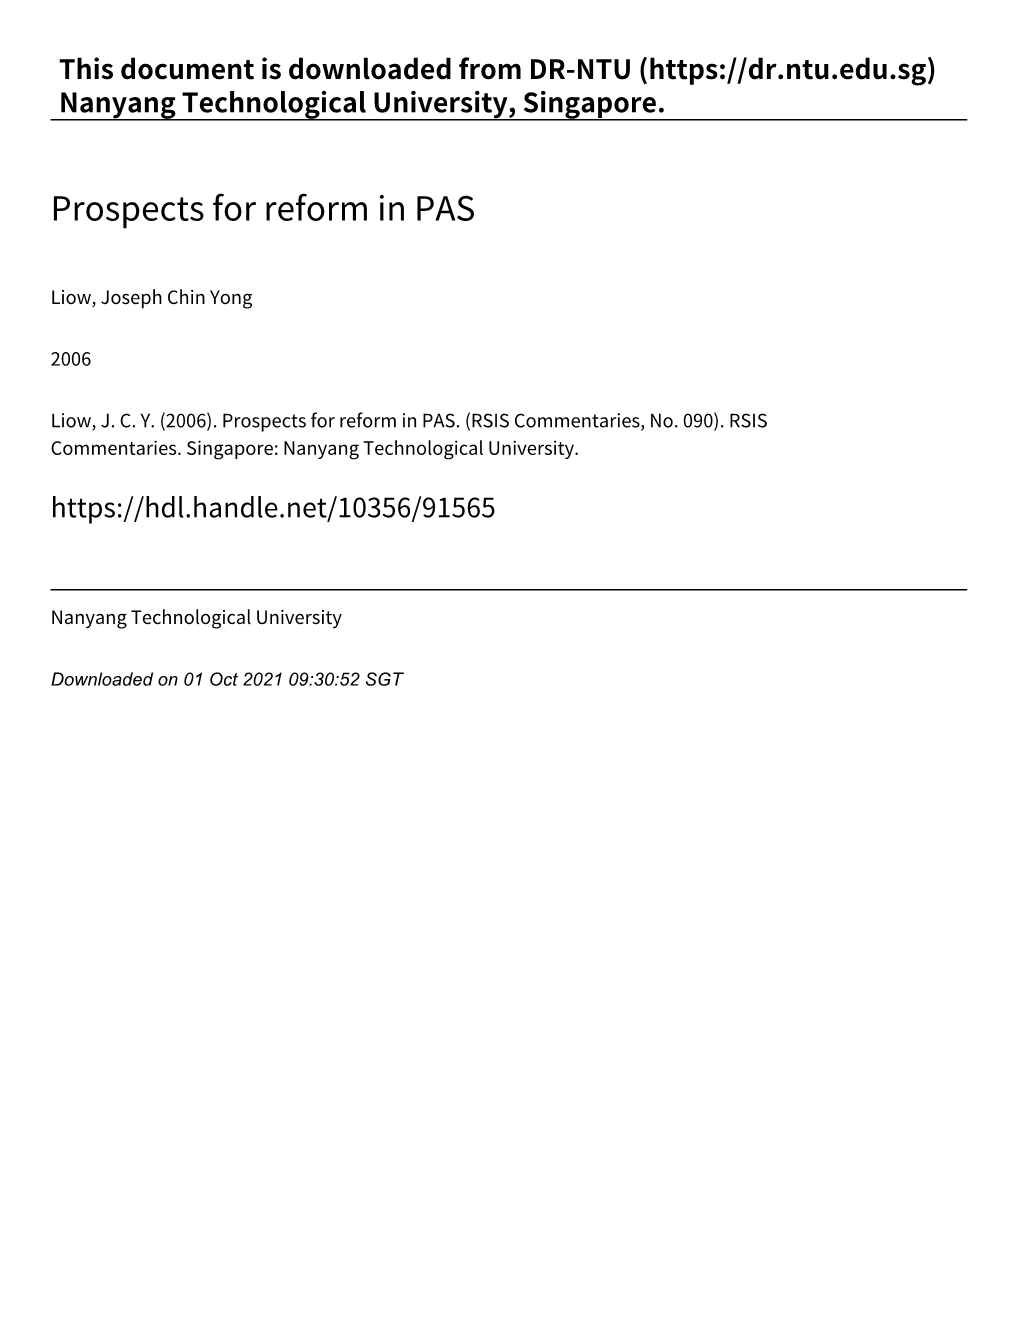 Prospects for Reform in PAS